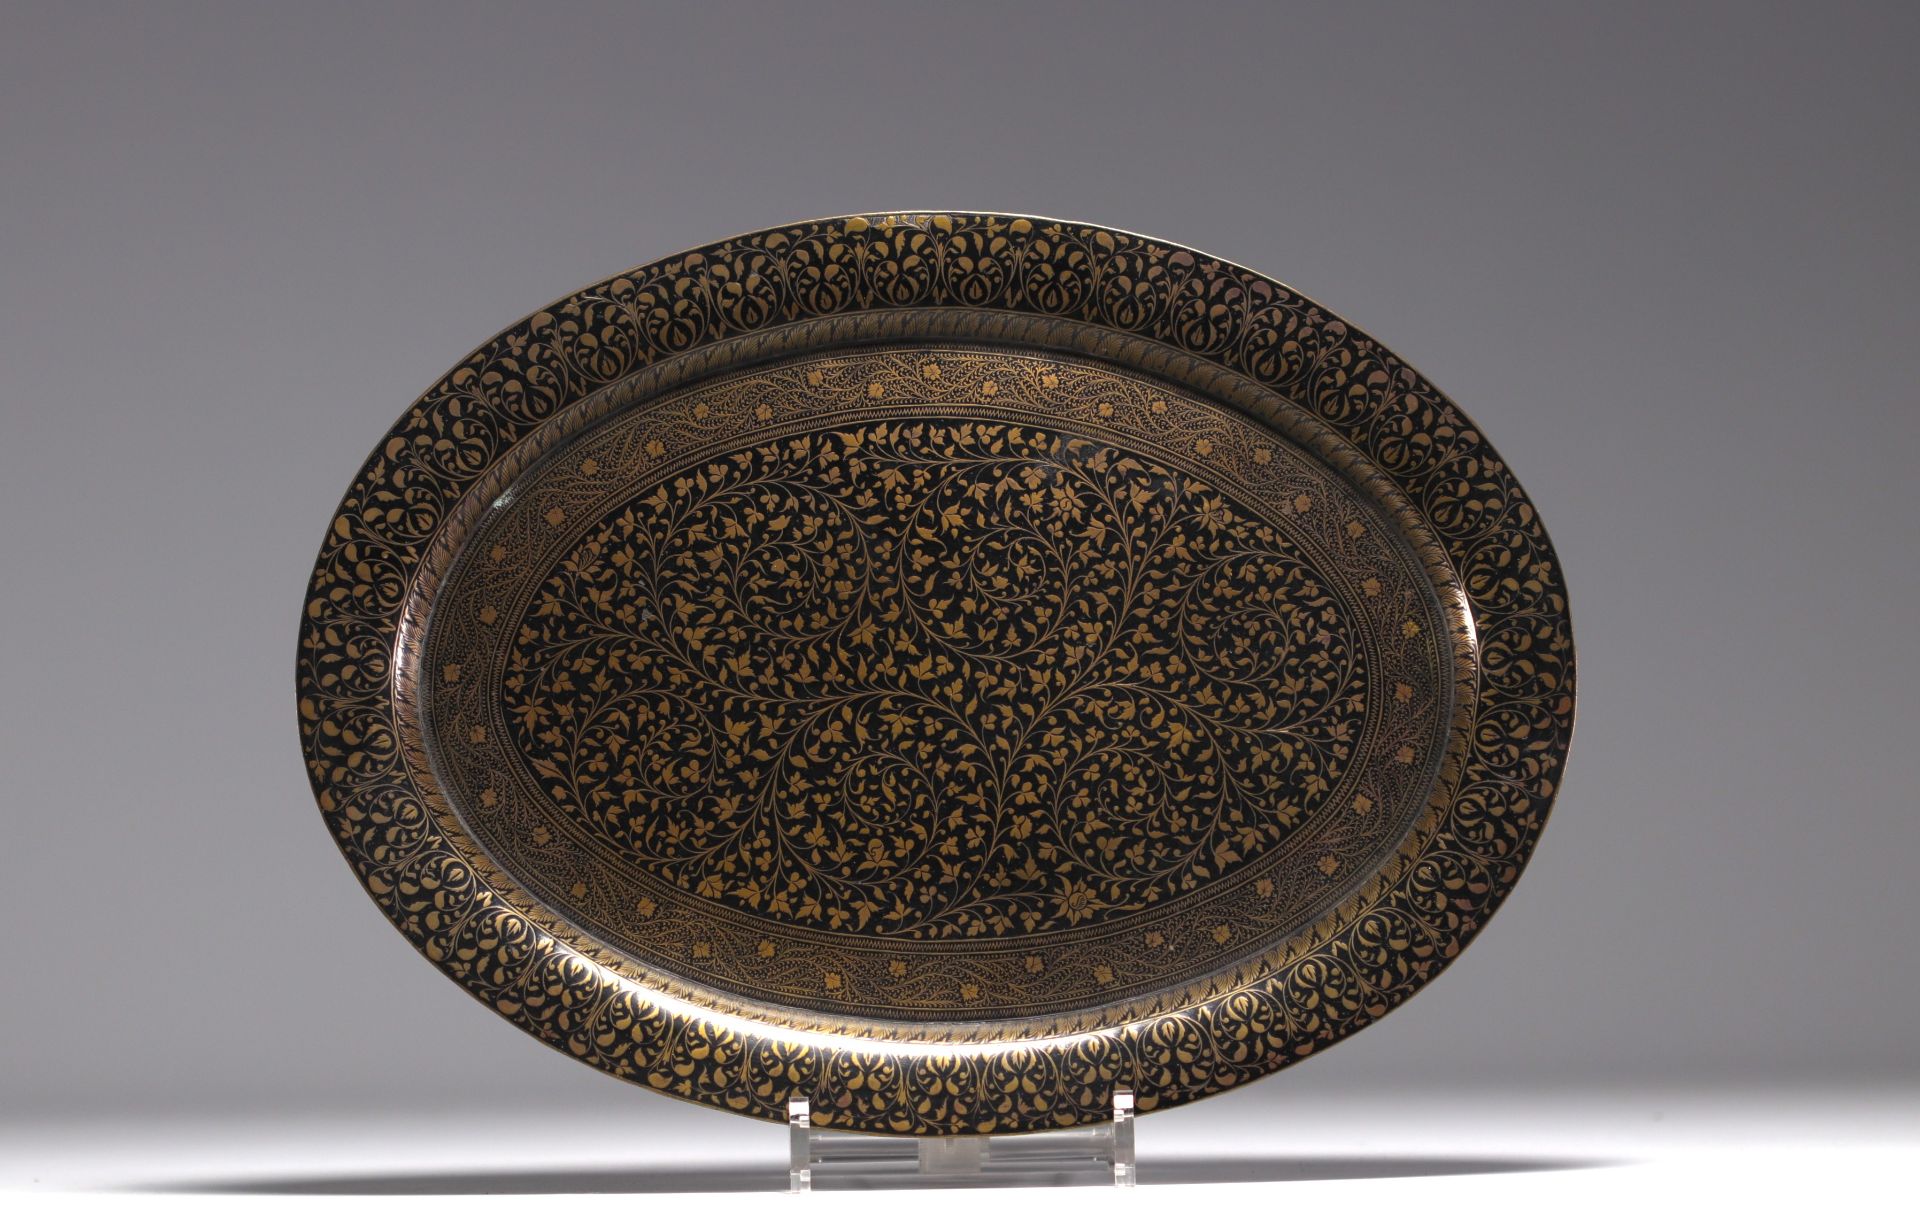 Iran - Copper and black lacquer tray with floral decoration, 19th-20th century